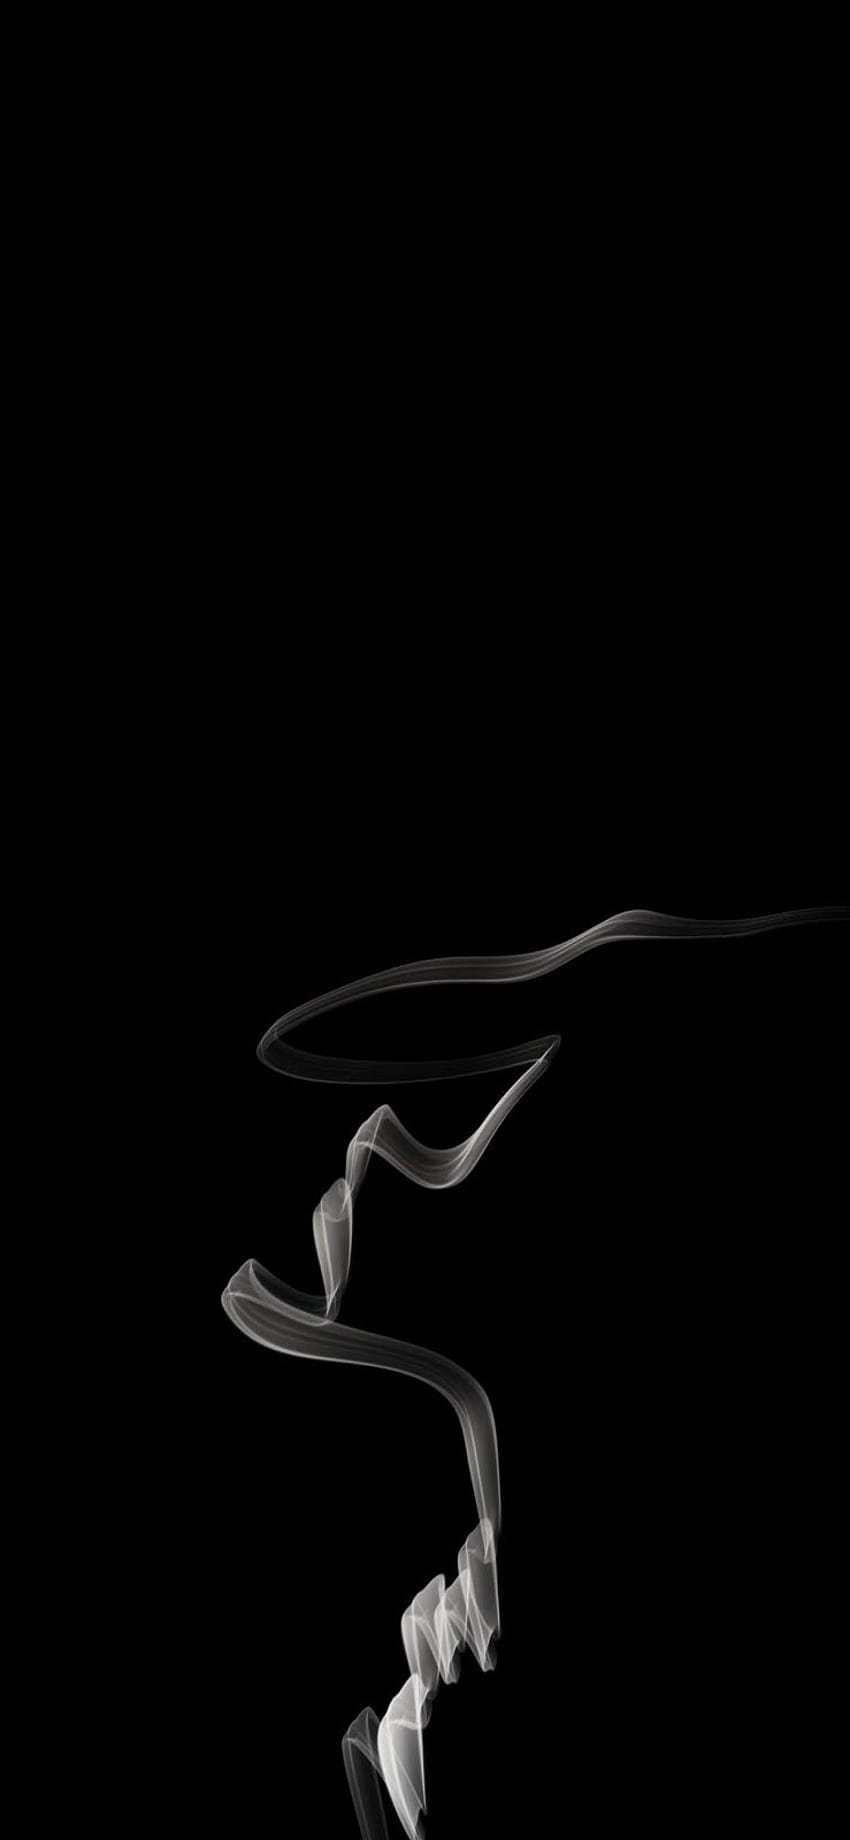 iPhone 11 Pro wallpapers true black optimized for OLED